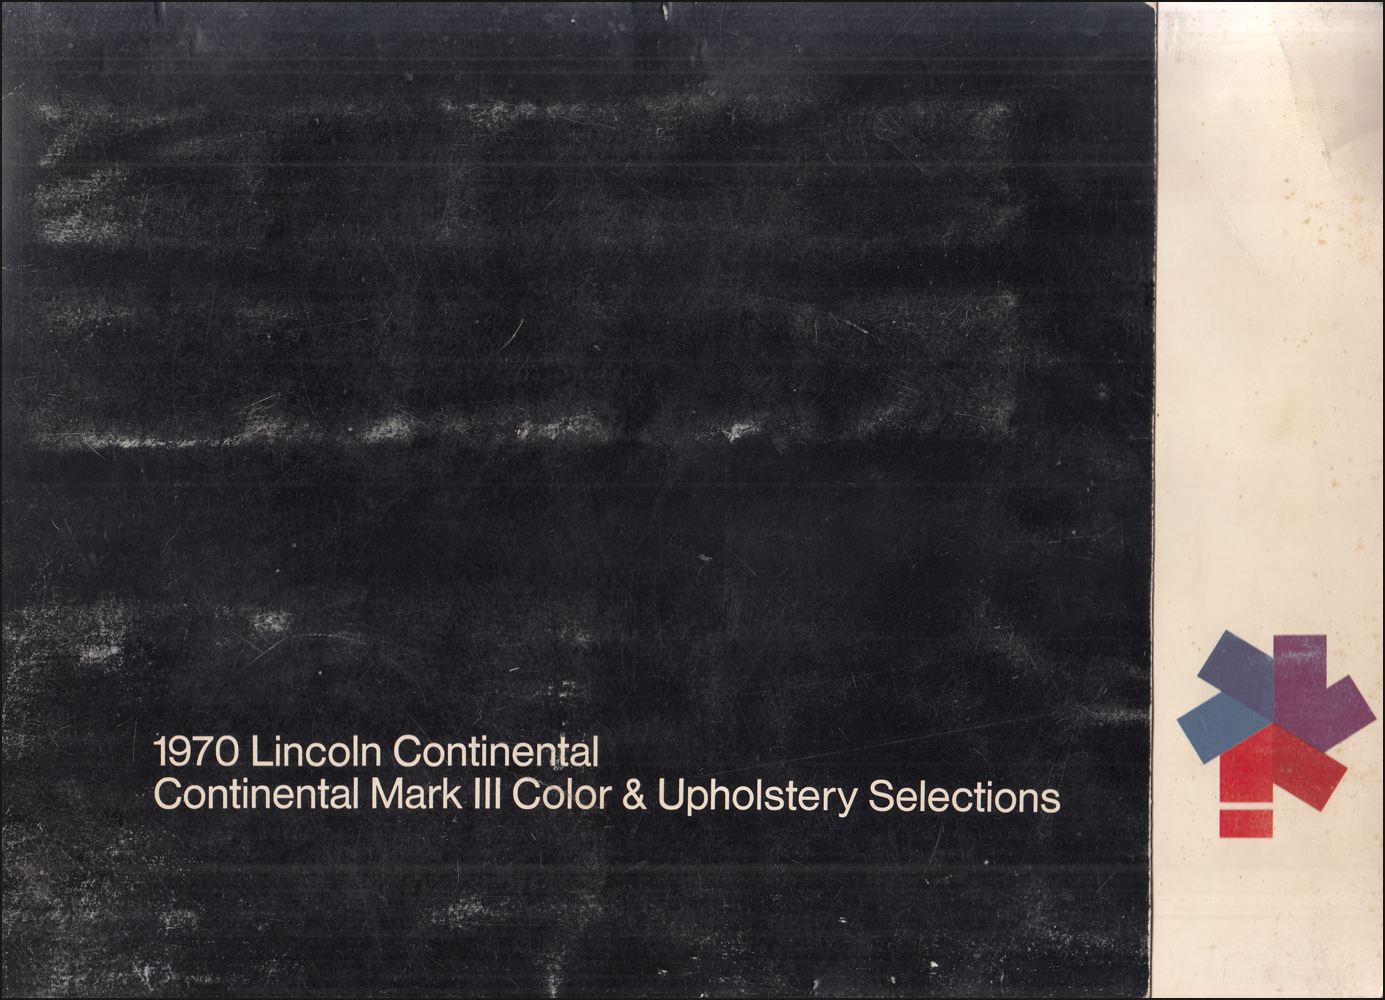 1970 Lincoln Color and Upholstery - Small Dealer Album Folder